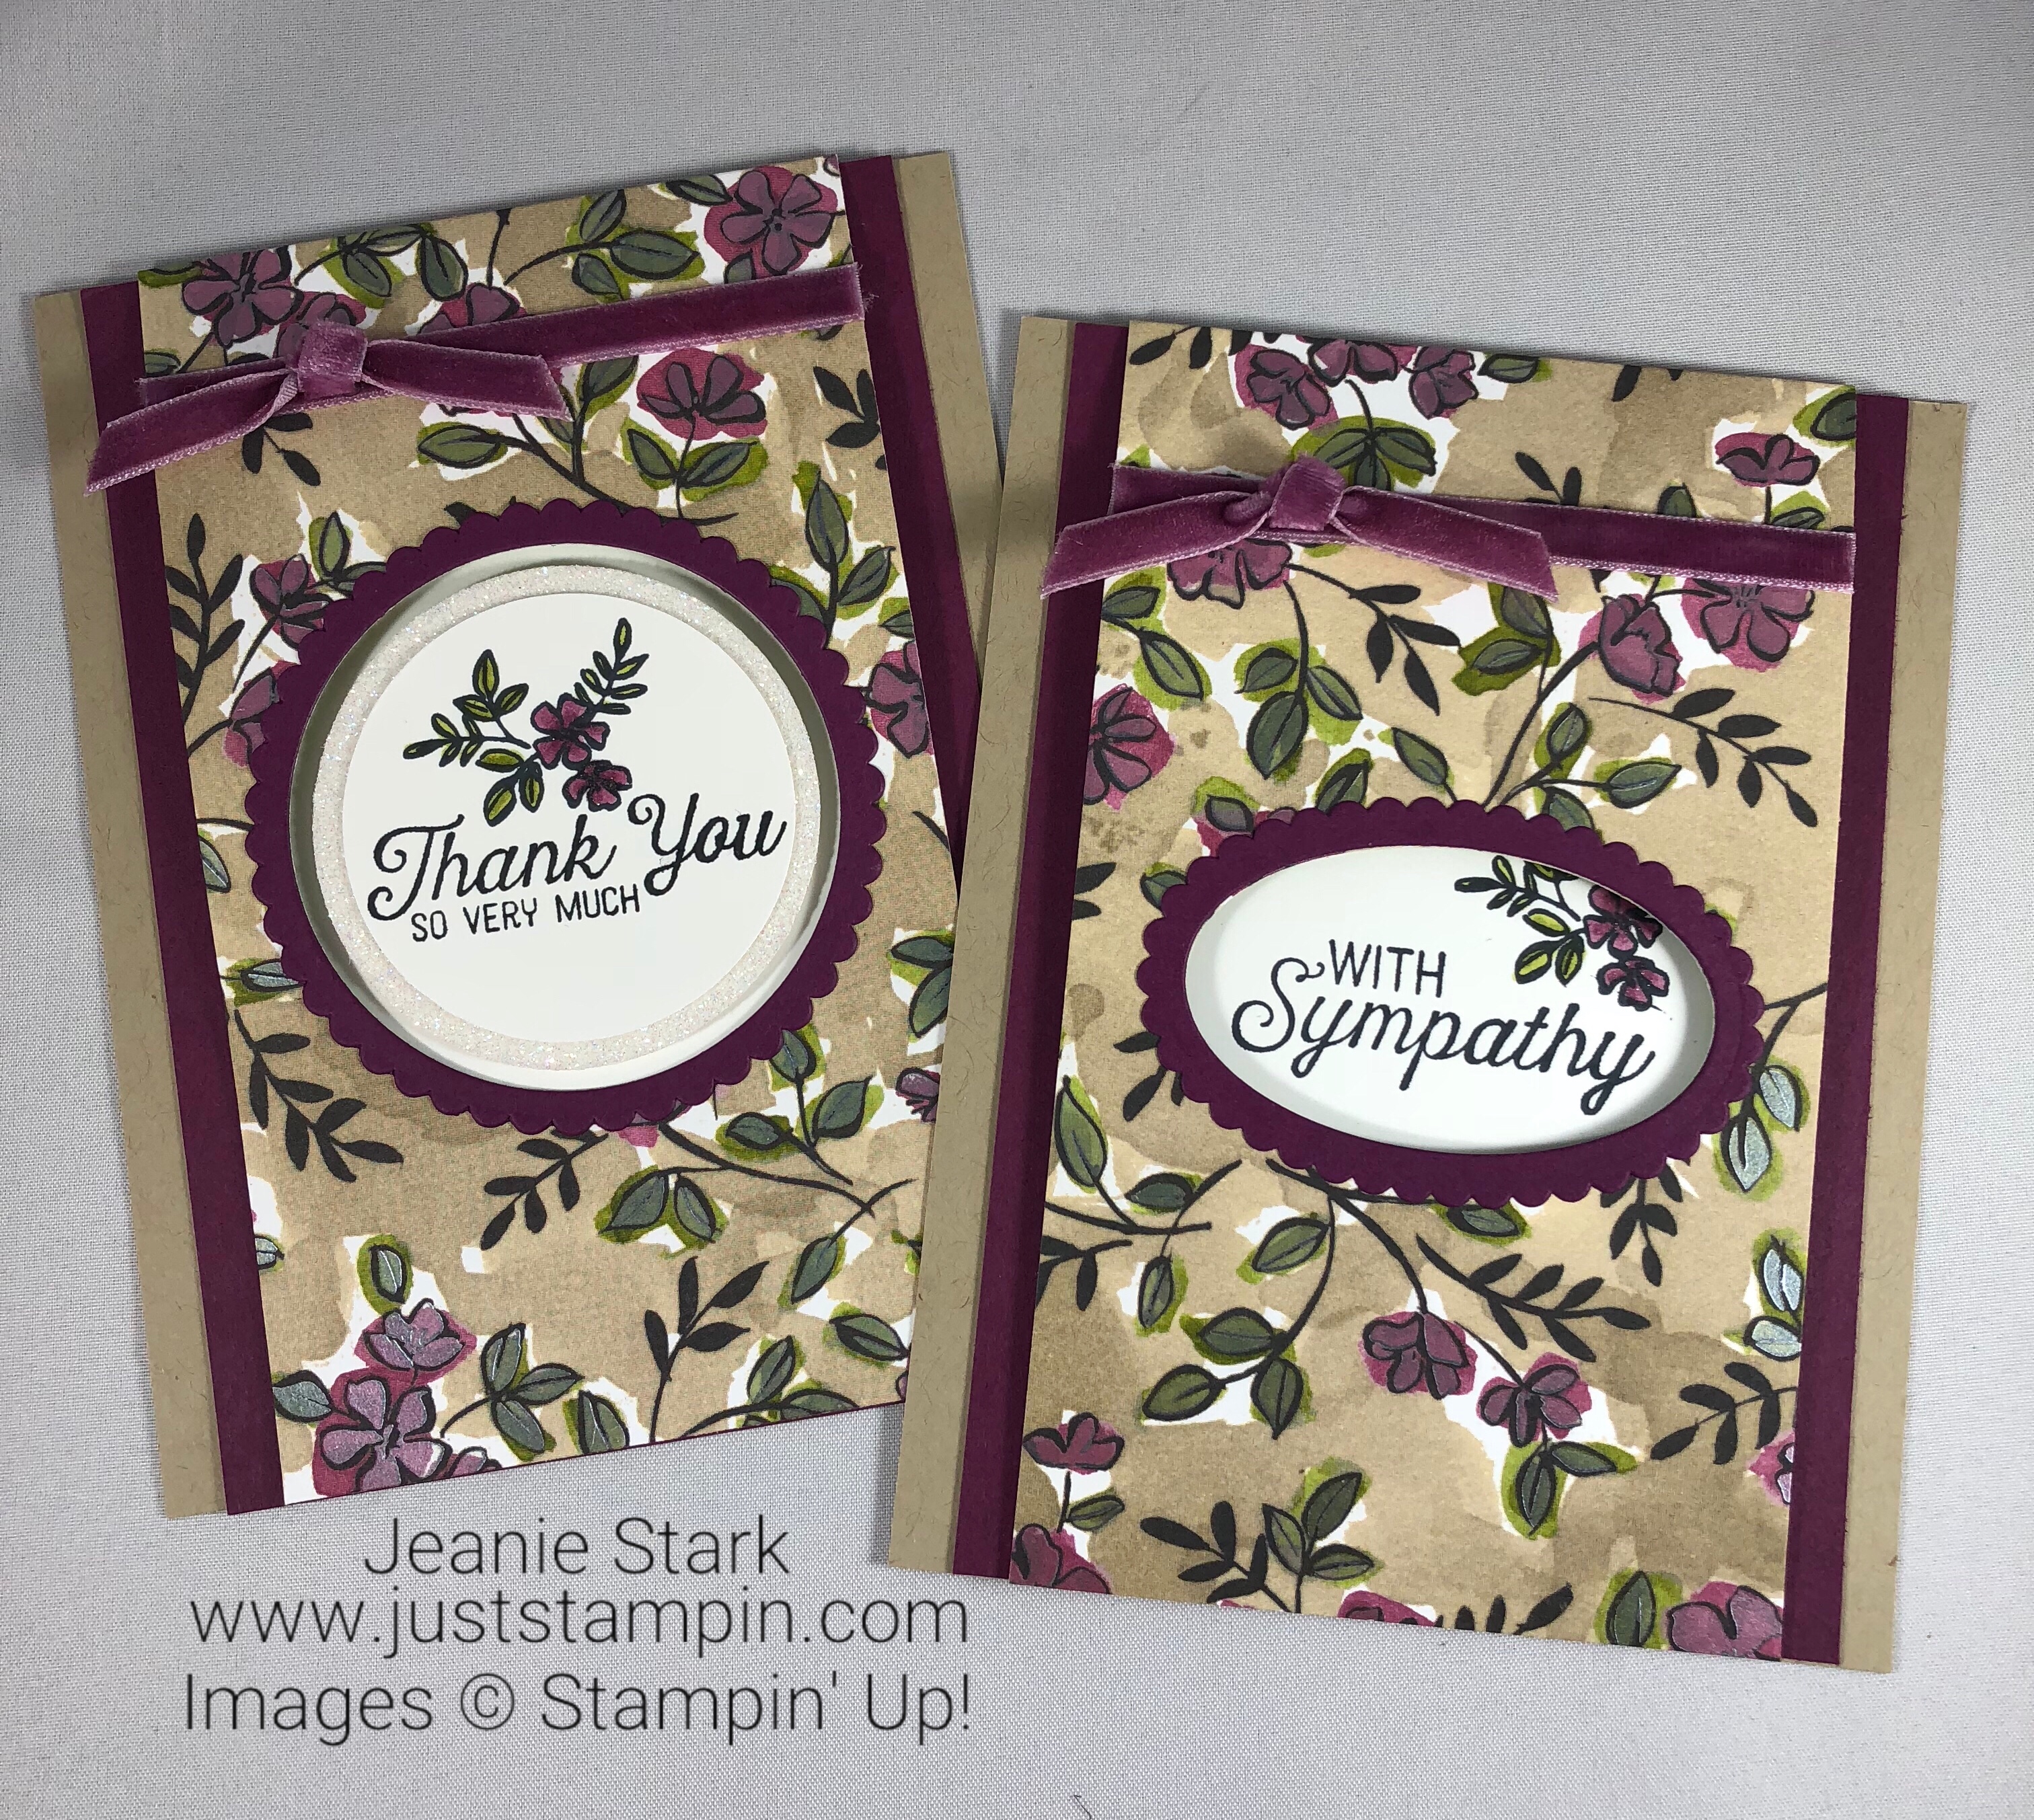 Stampin Up Flourishing Phrases Fun Fold thank you and sympathy card ideas - Jeanie Stark StampinUp